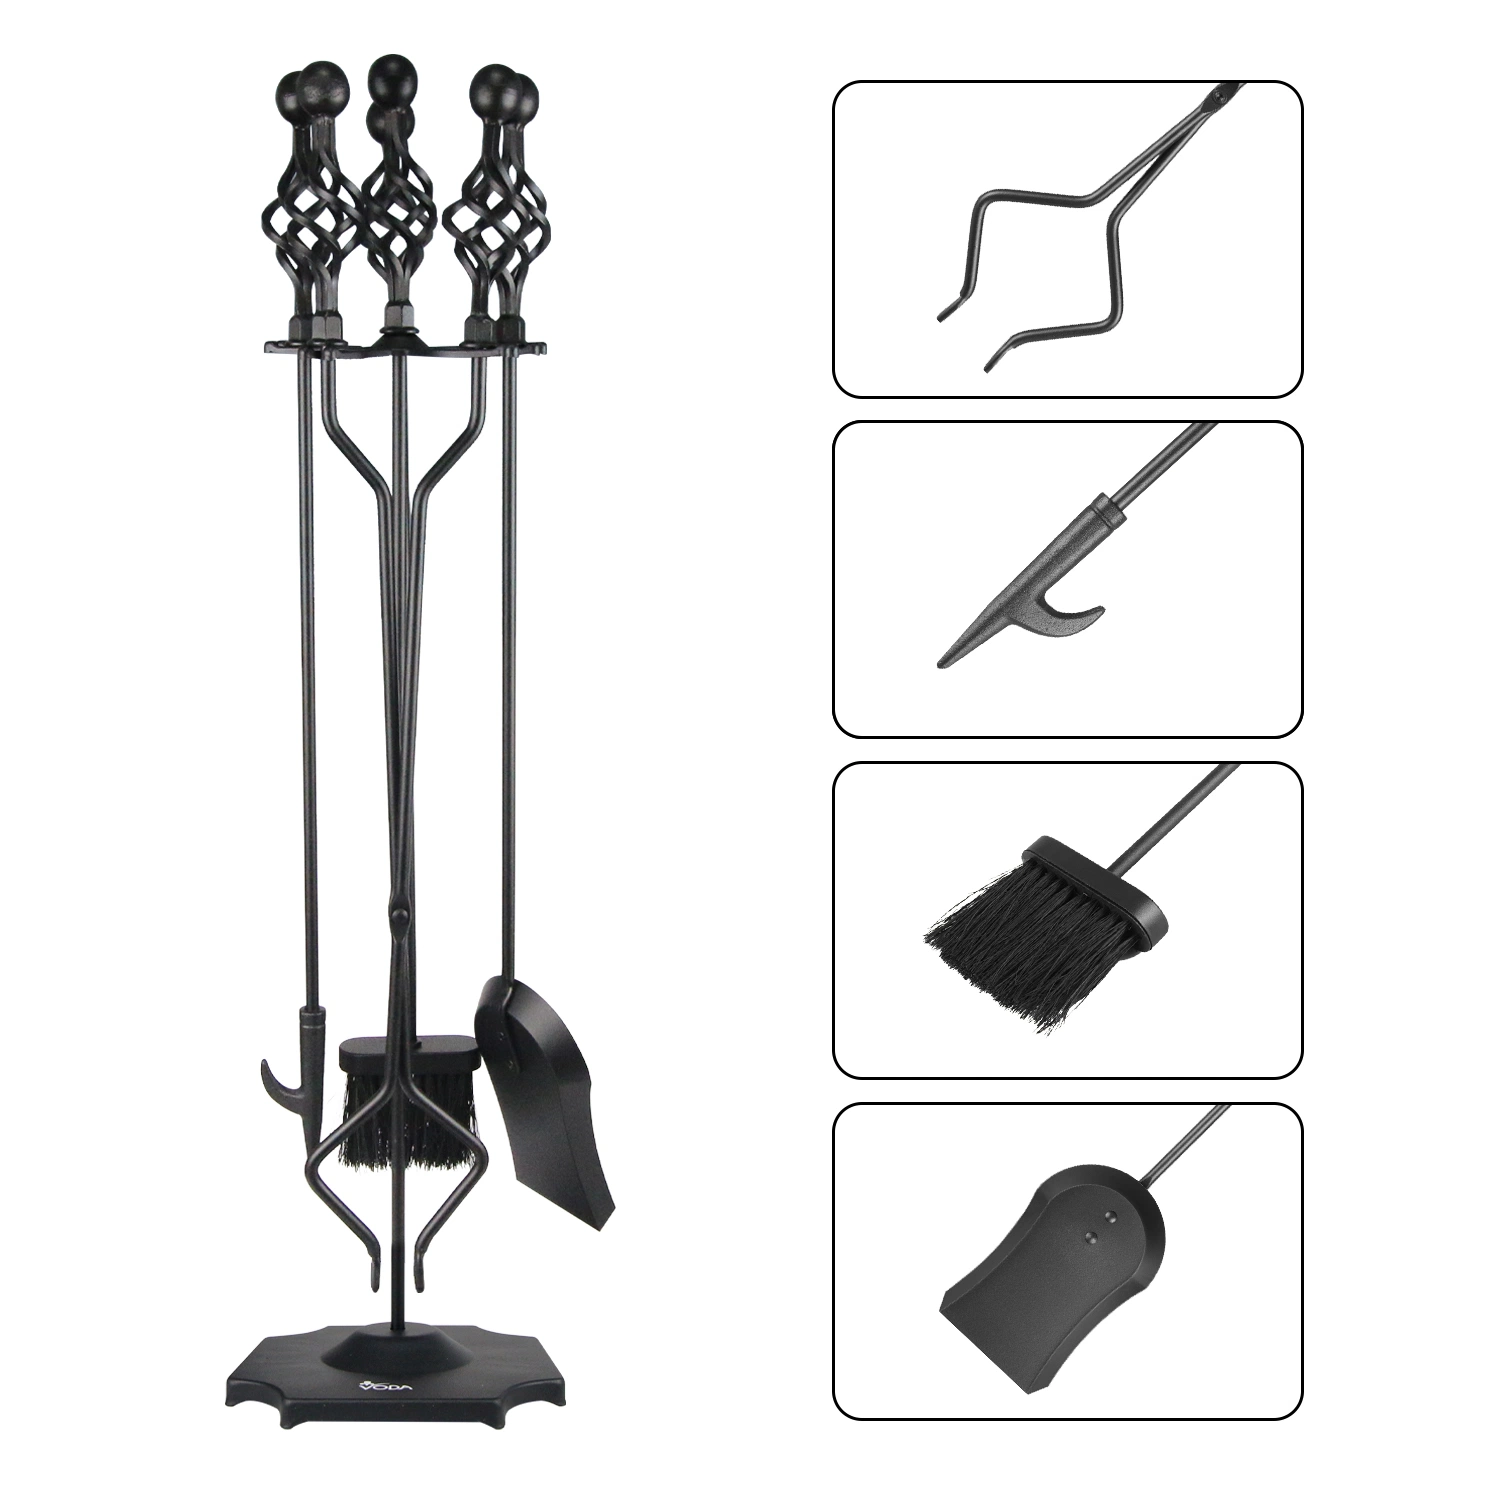 New 5 Pieces Fireplace Tool Set Black Cast Iron Fire Place Tool Set with Log Holder Fire Pit Stand Rustic Tongs Shovel Antique Broom Chimney Poker Wood Stove